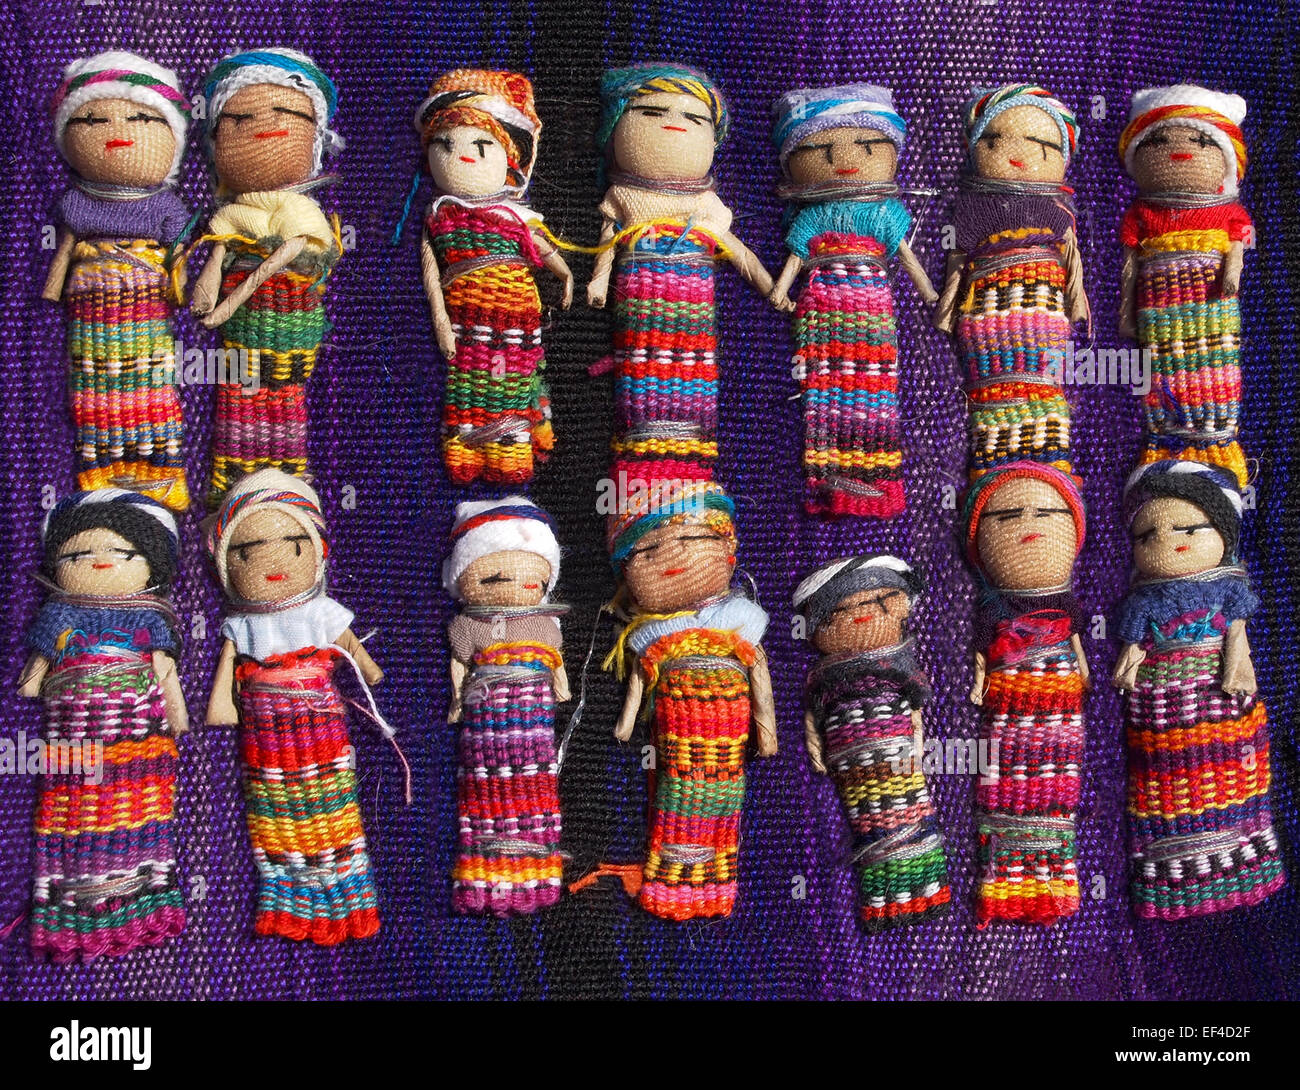 A collection of large, colorful Guatemalan Worry Dolls lined up in two rows on a purple woven blanket. Stock Photo